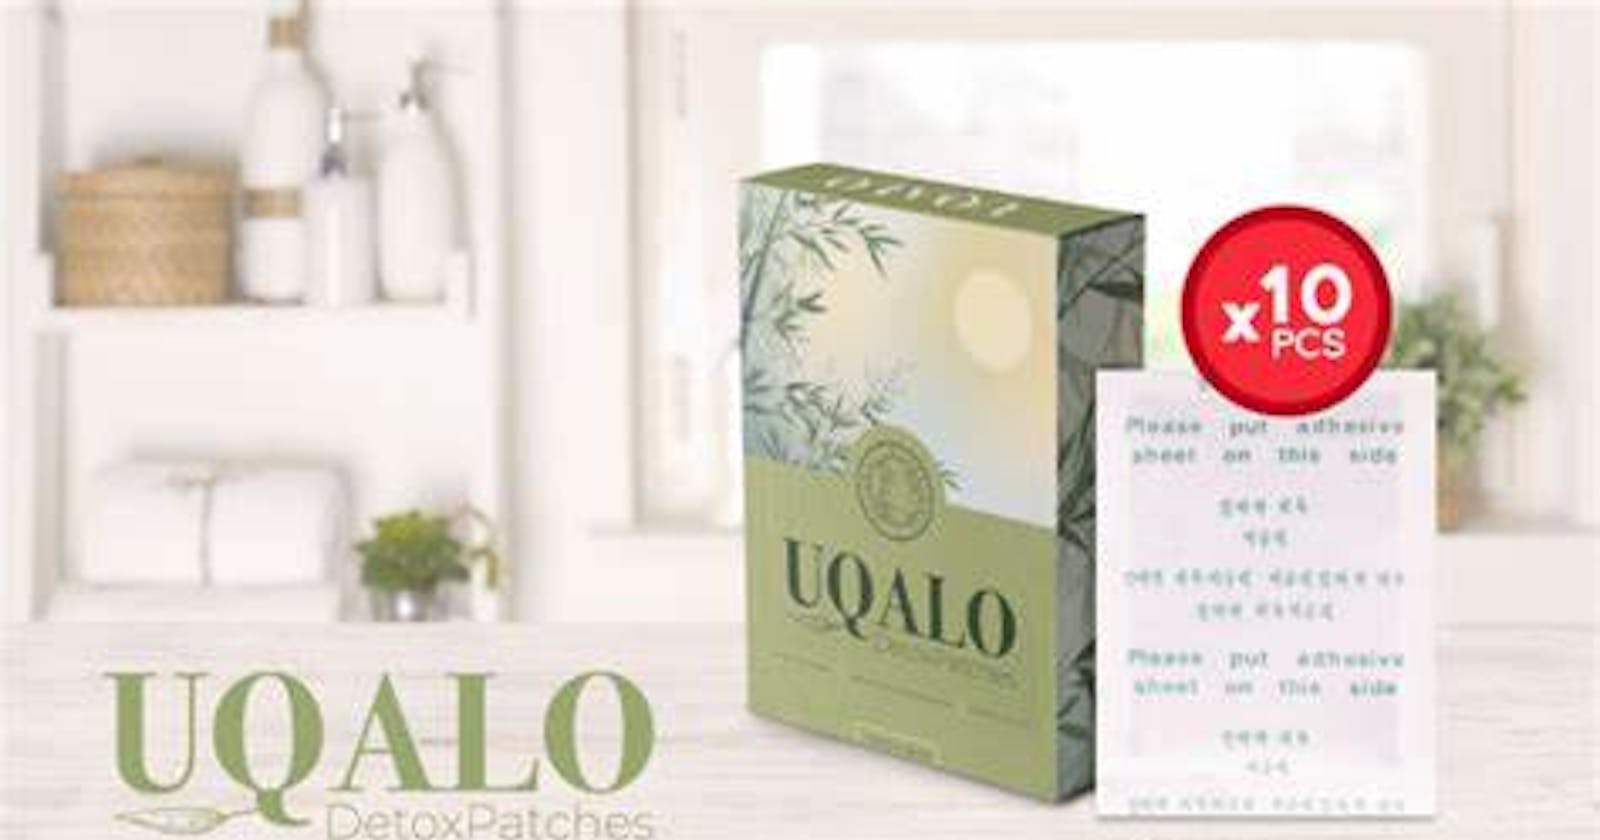 Uqalo Dazzlid  Reviews – Does This Product Really Work?